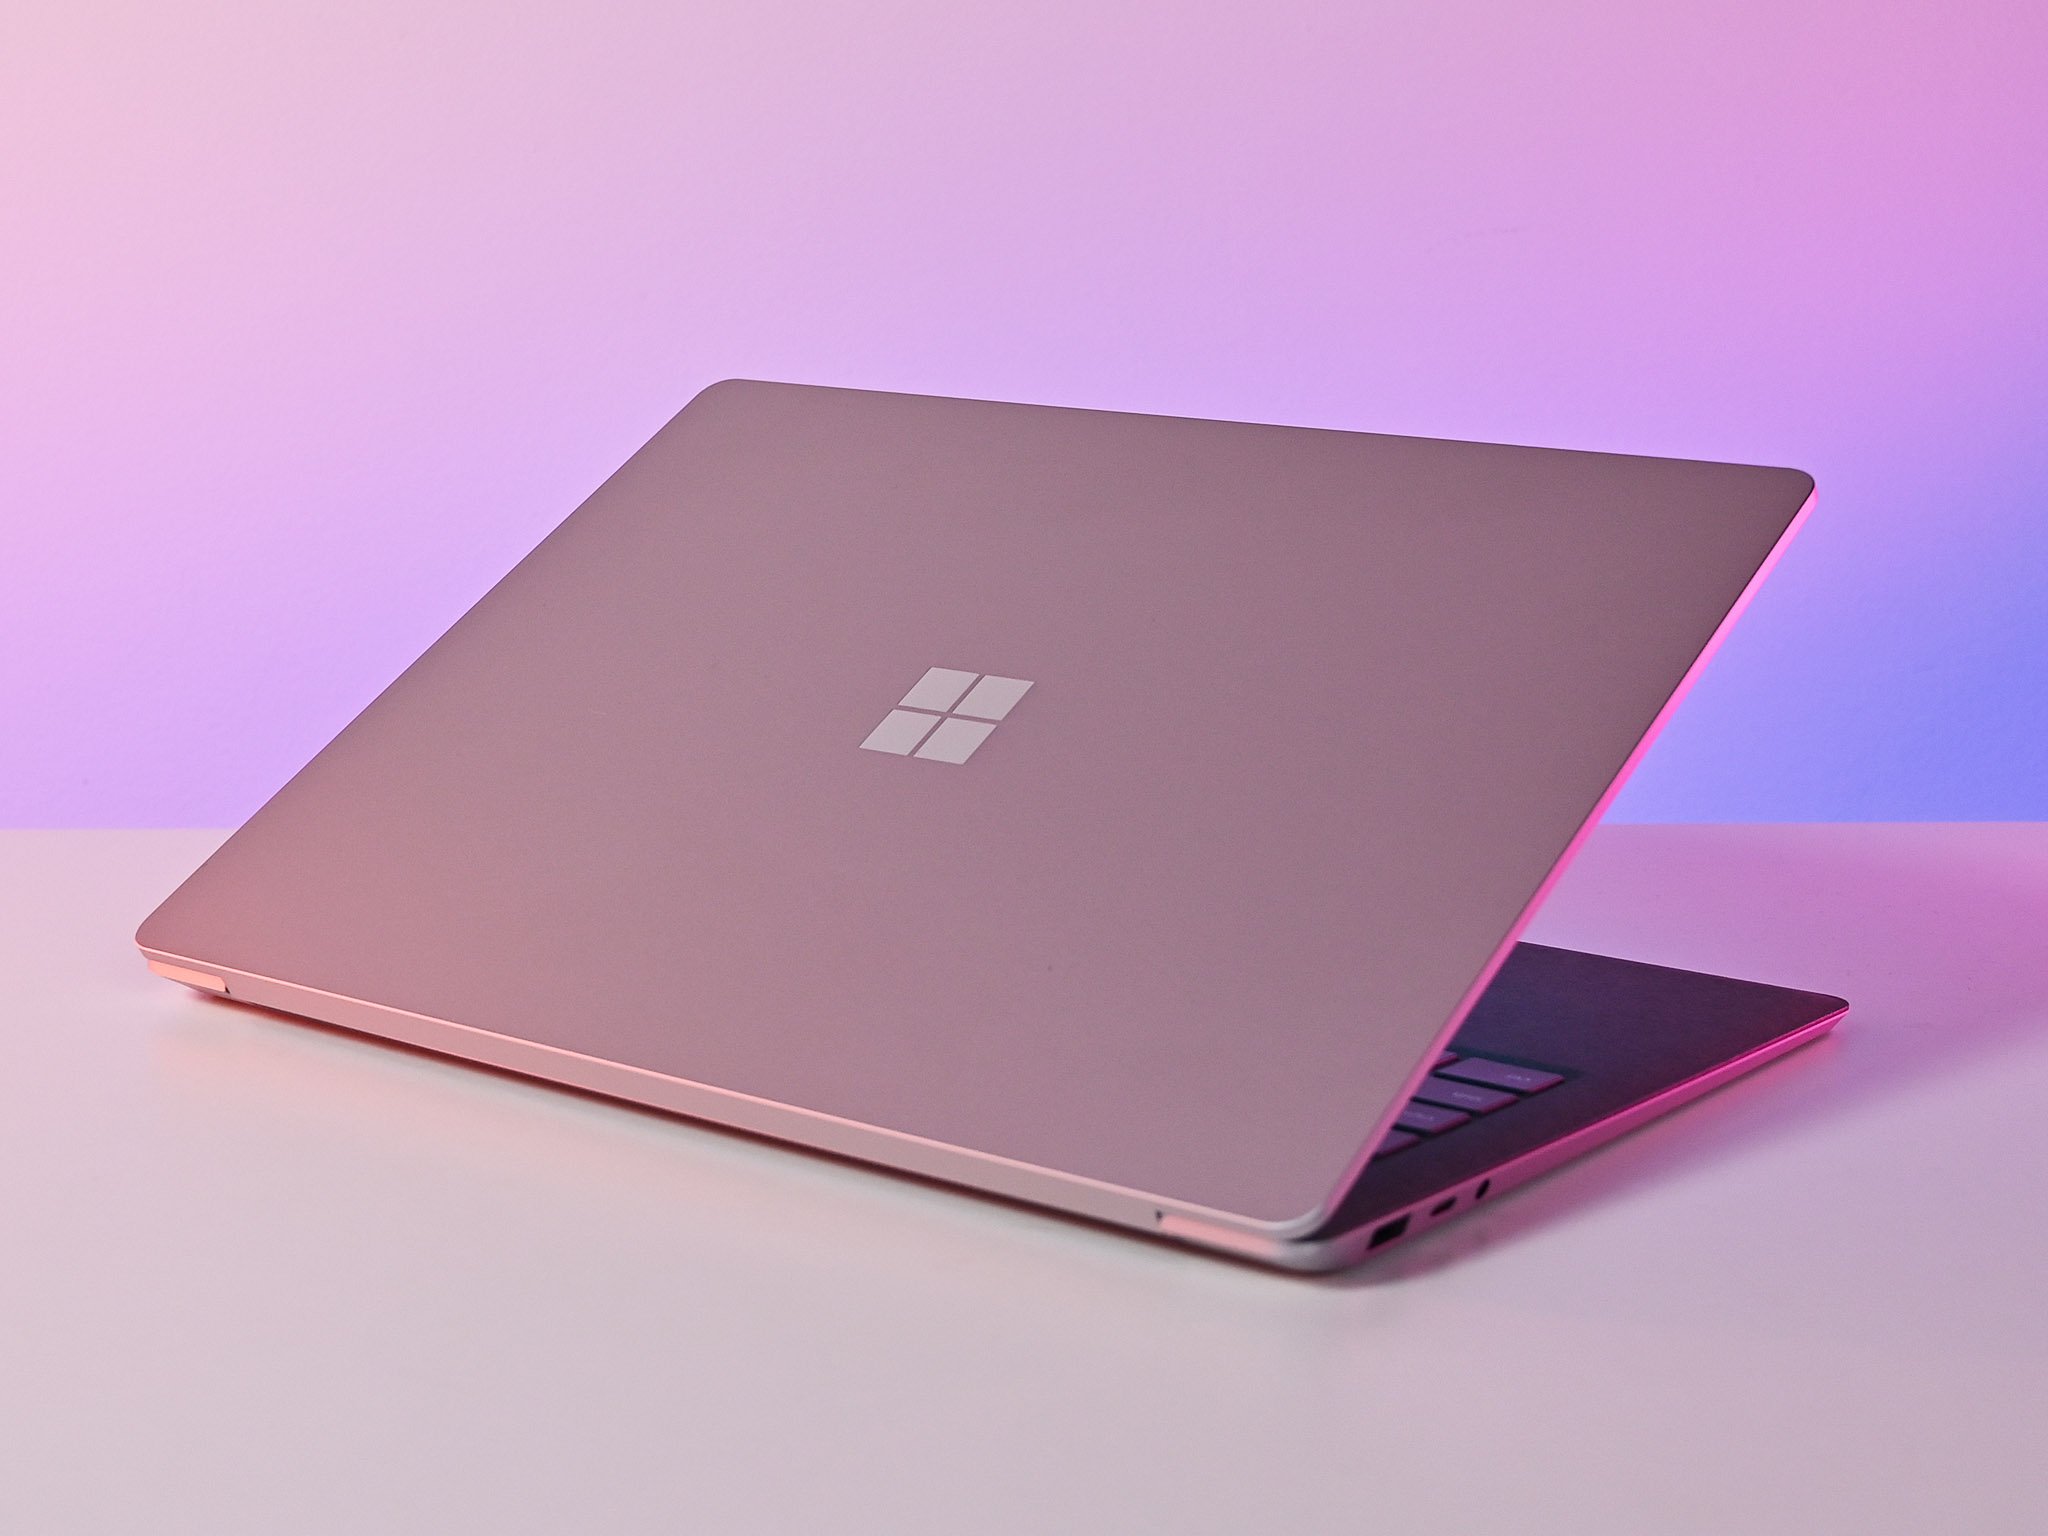 Surface Laptop 3 13.5 review: A delightful laptop that exceeds the